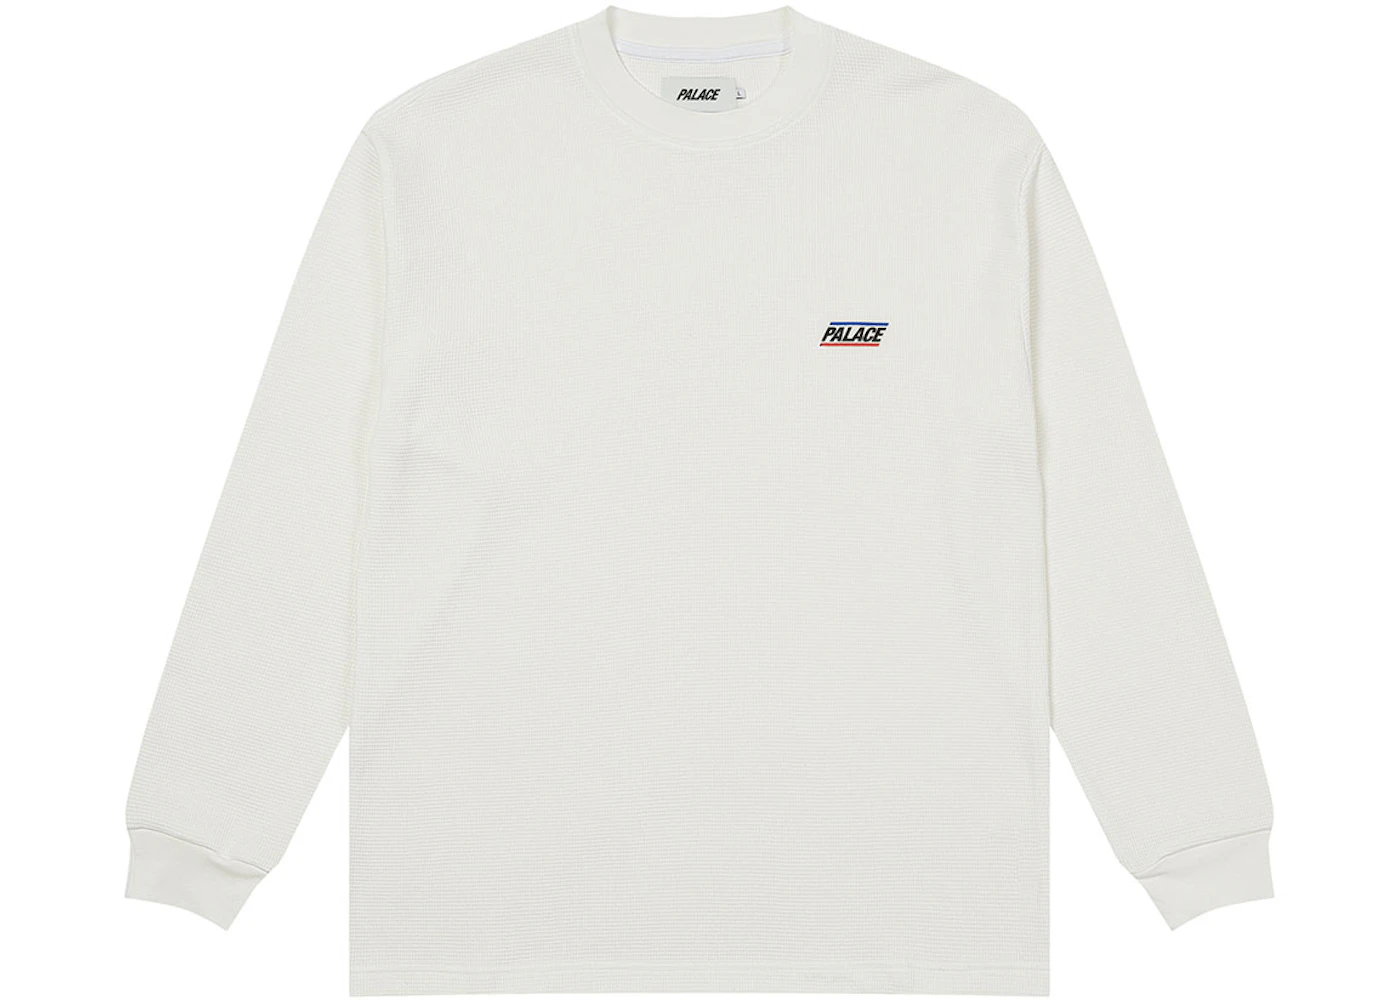 Palace Thermal Longsleeve White Men's - FW20 - GB